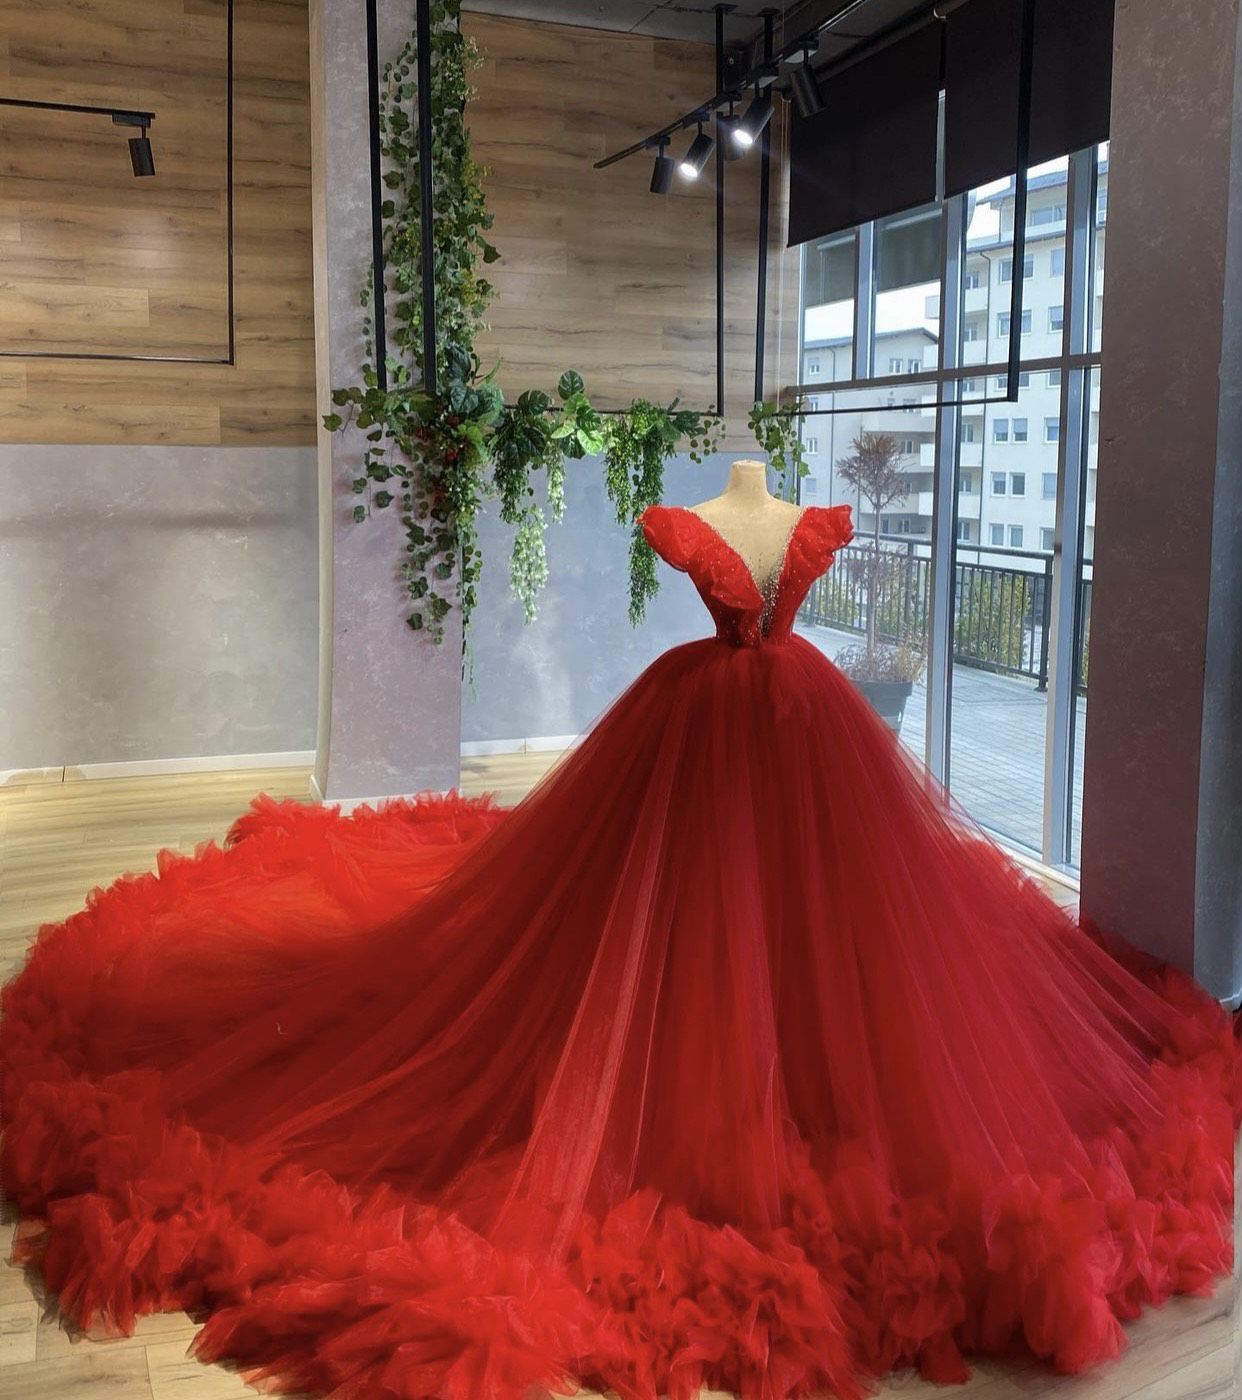 Discover more than 150 red gown dress pic